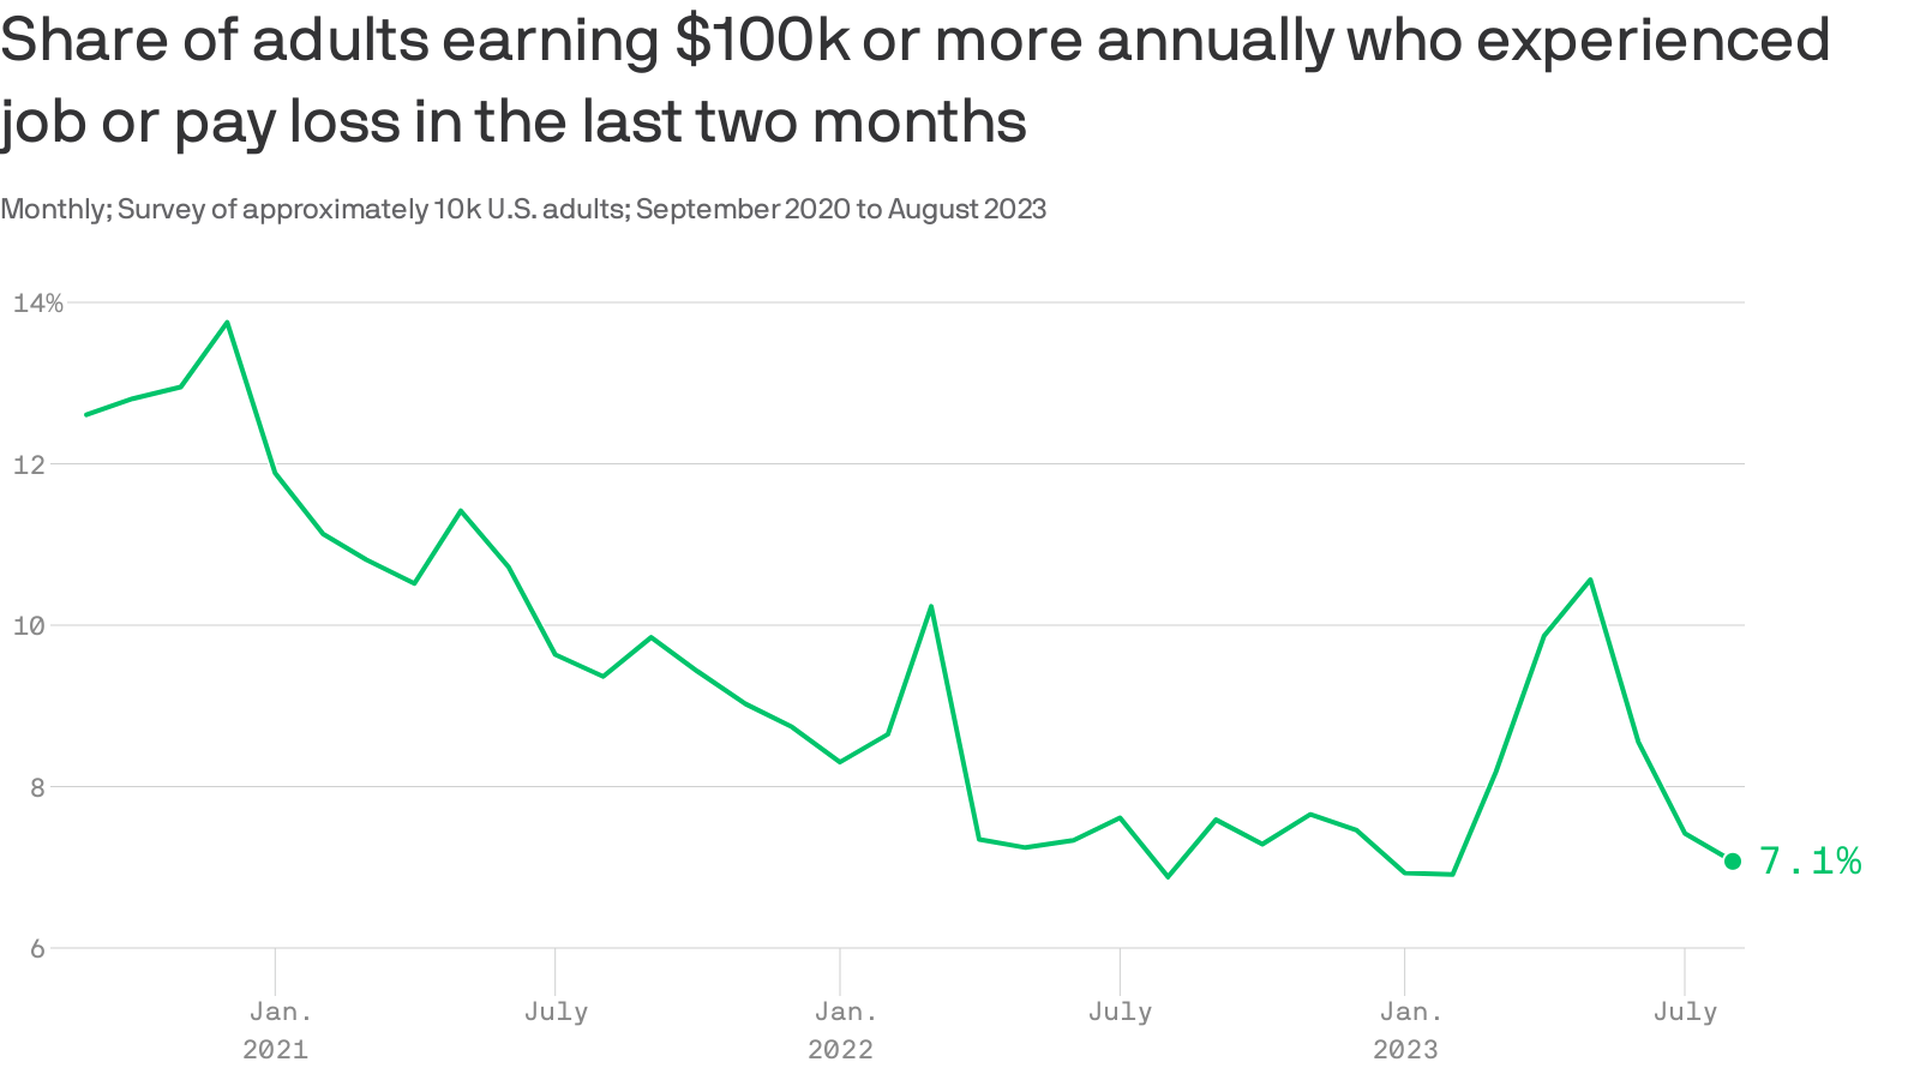 Chart shows share of adults earning $100k or more annually who experienced job or pay loss in the last two months.